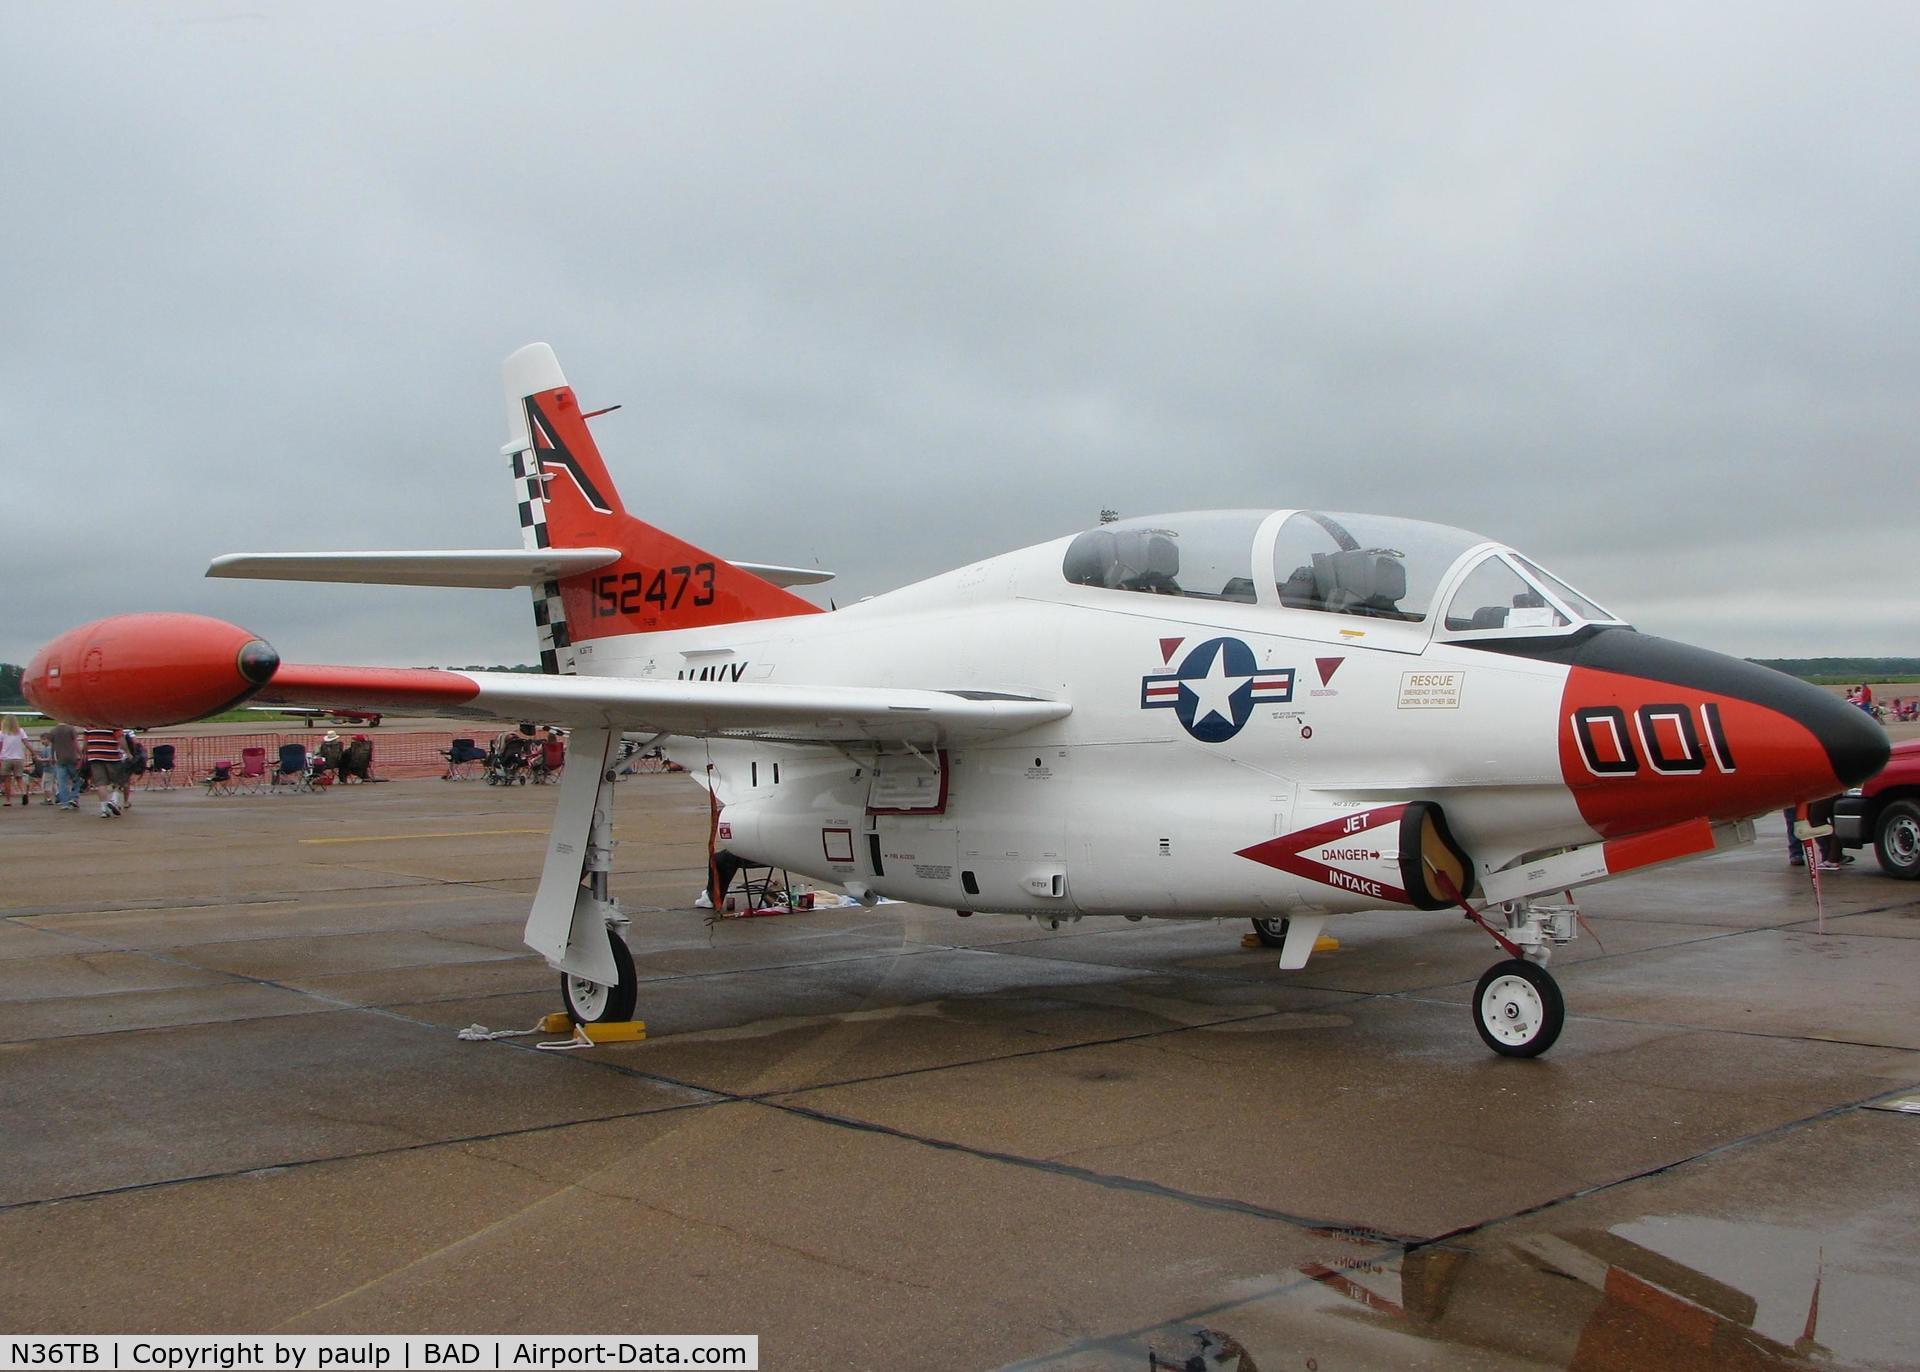 N36TB, Rockwell T-2B Buckeye C/N 291-34, On display at the Defenders of Liberty Airshow 2009 at Barksdale Air Force Base, Louisiana.